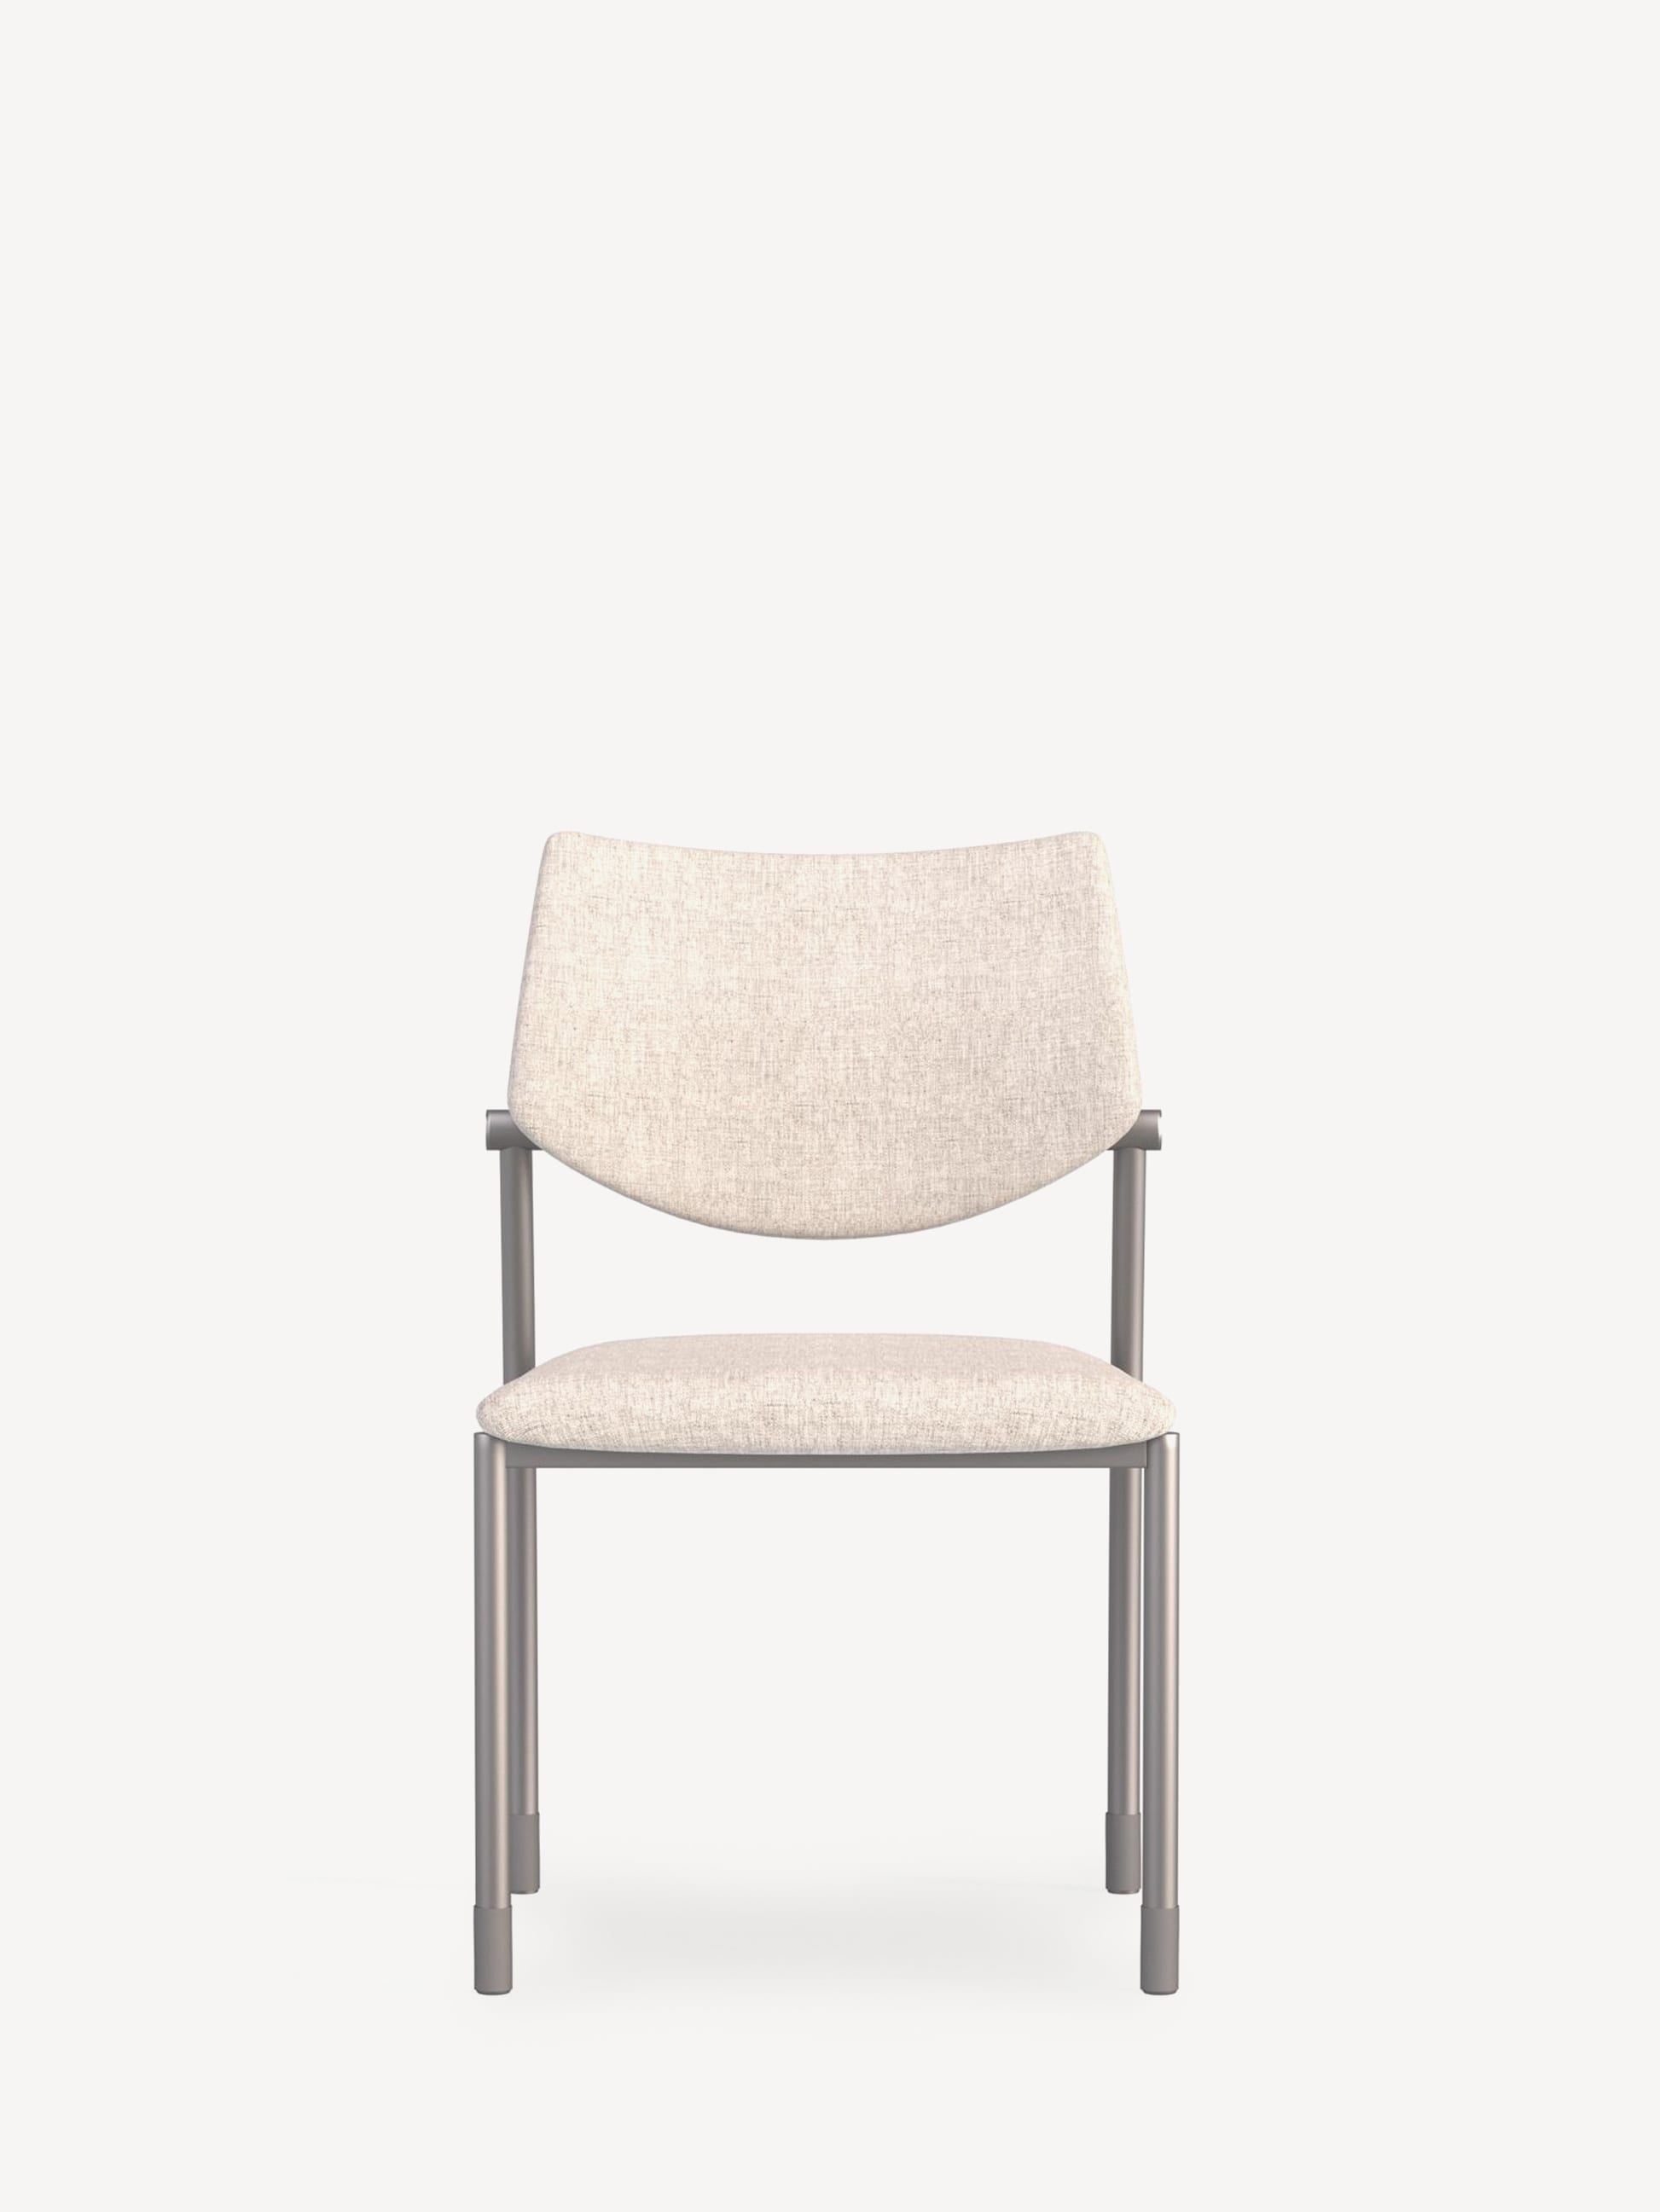 Front view of the Gunlocke Molti guest chair with a silver frame and off-white upholstery.